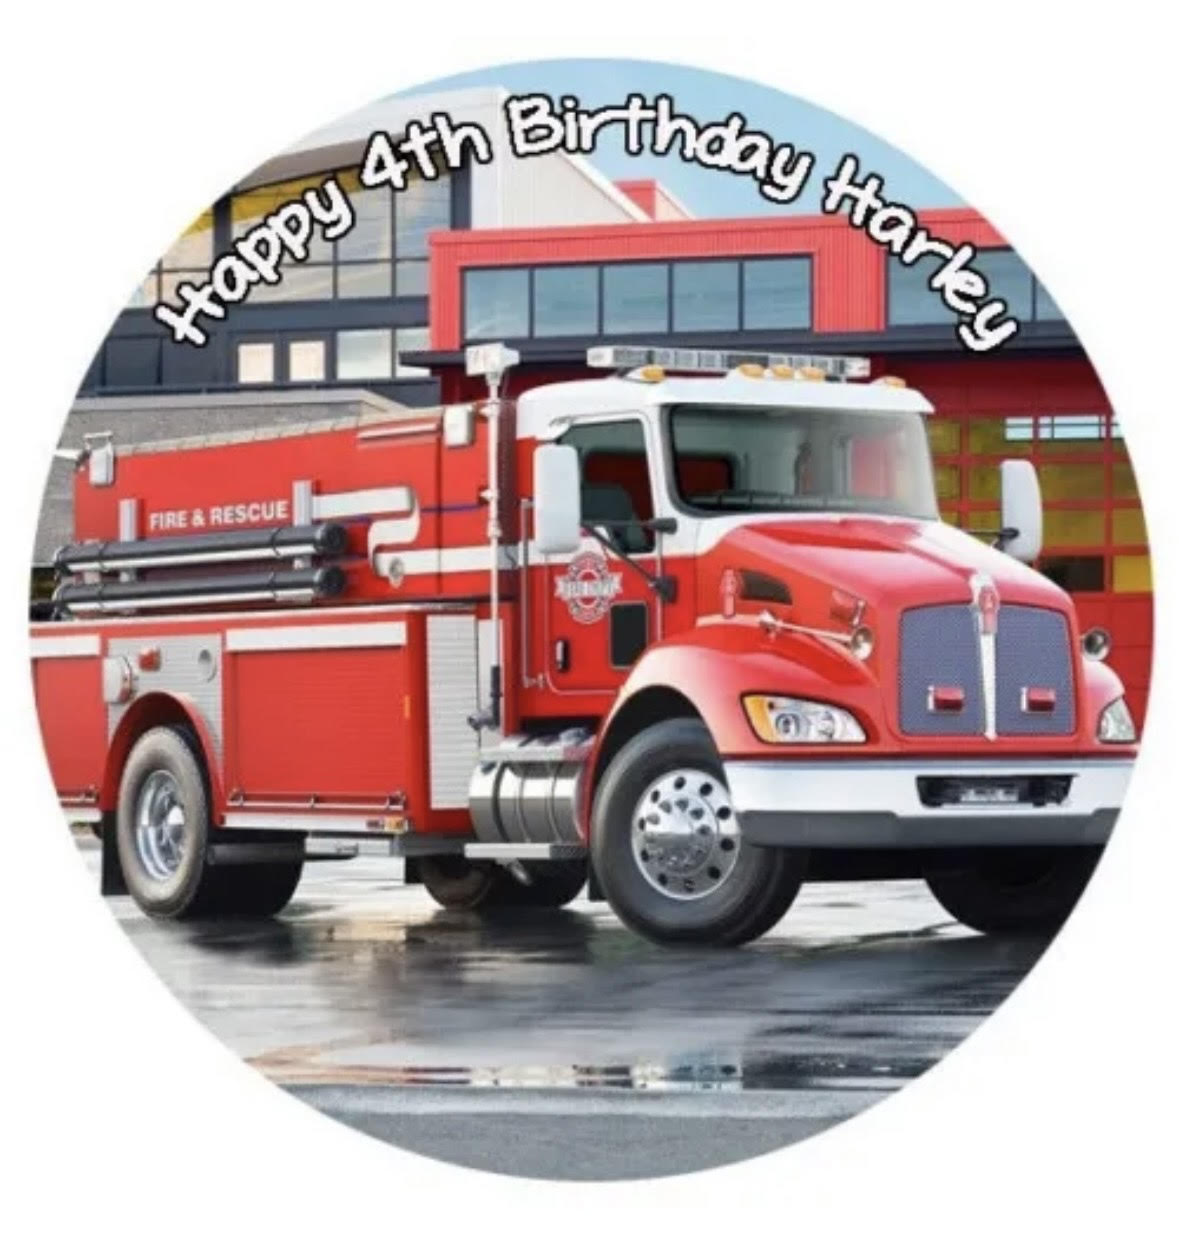 Firetruck Fire Engine Round Cake Edible Icing Image Topper 19cm